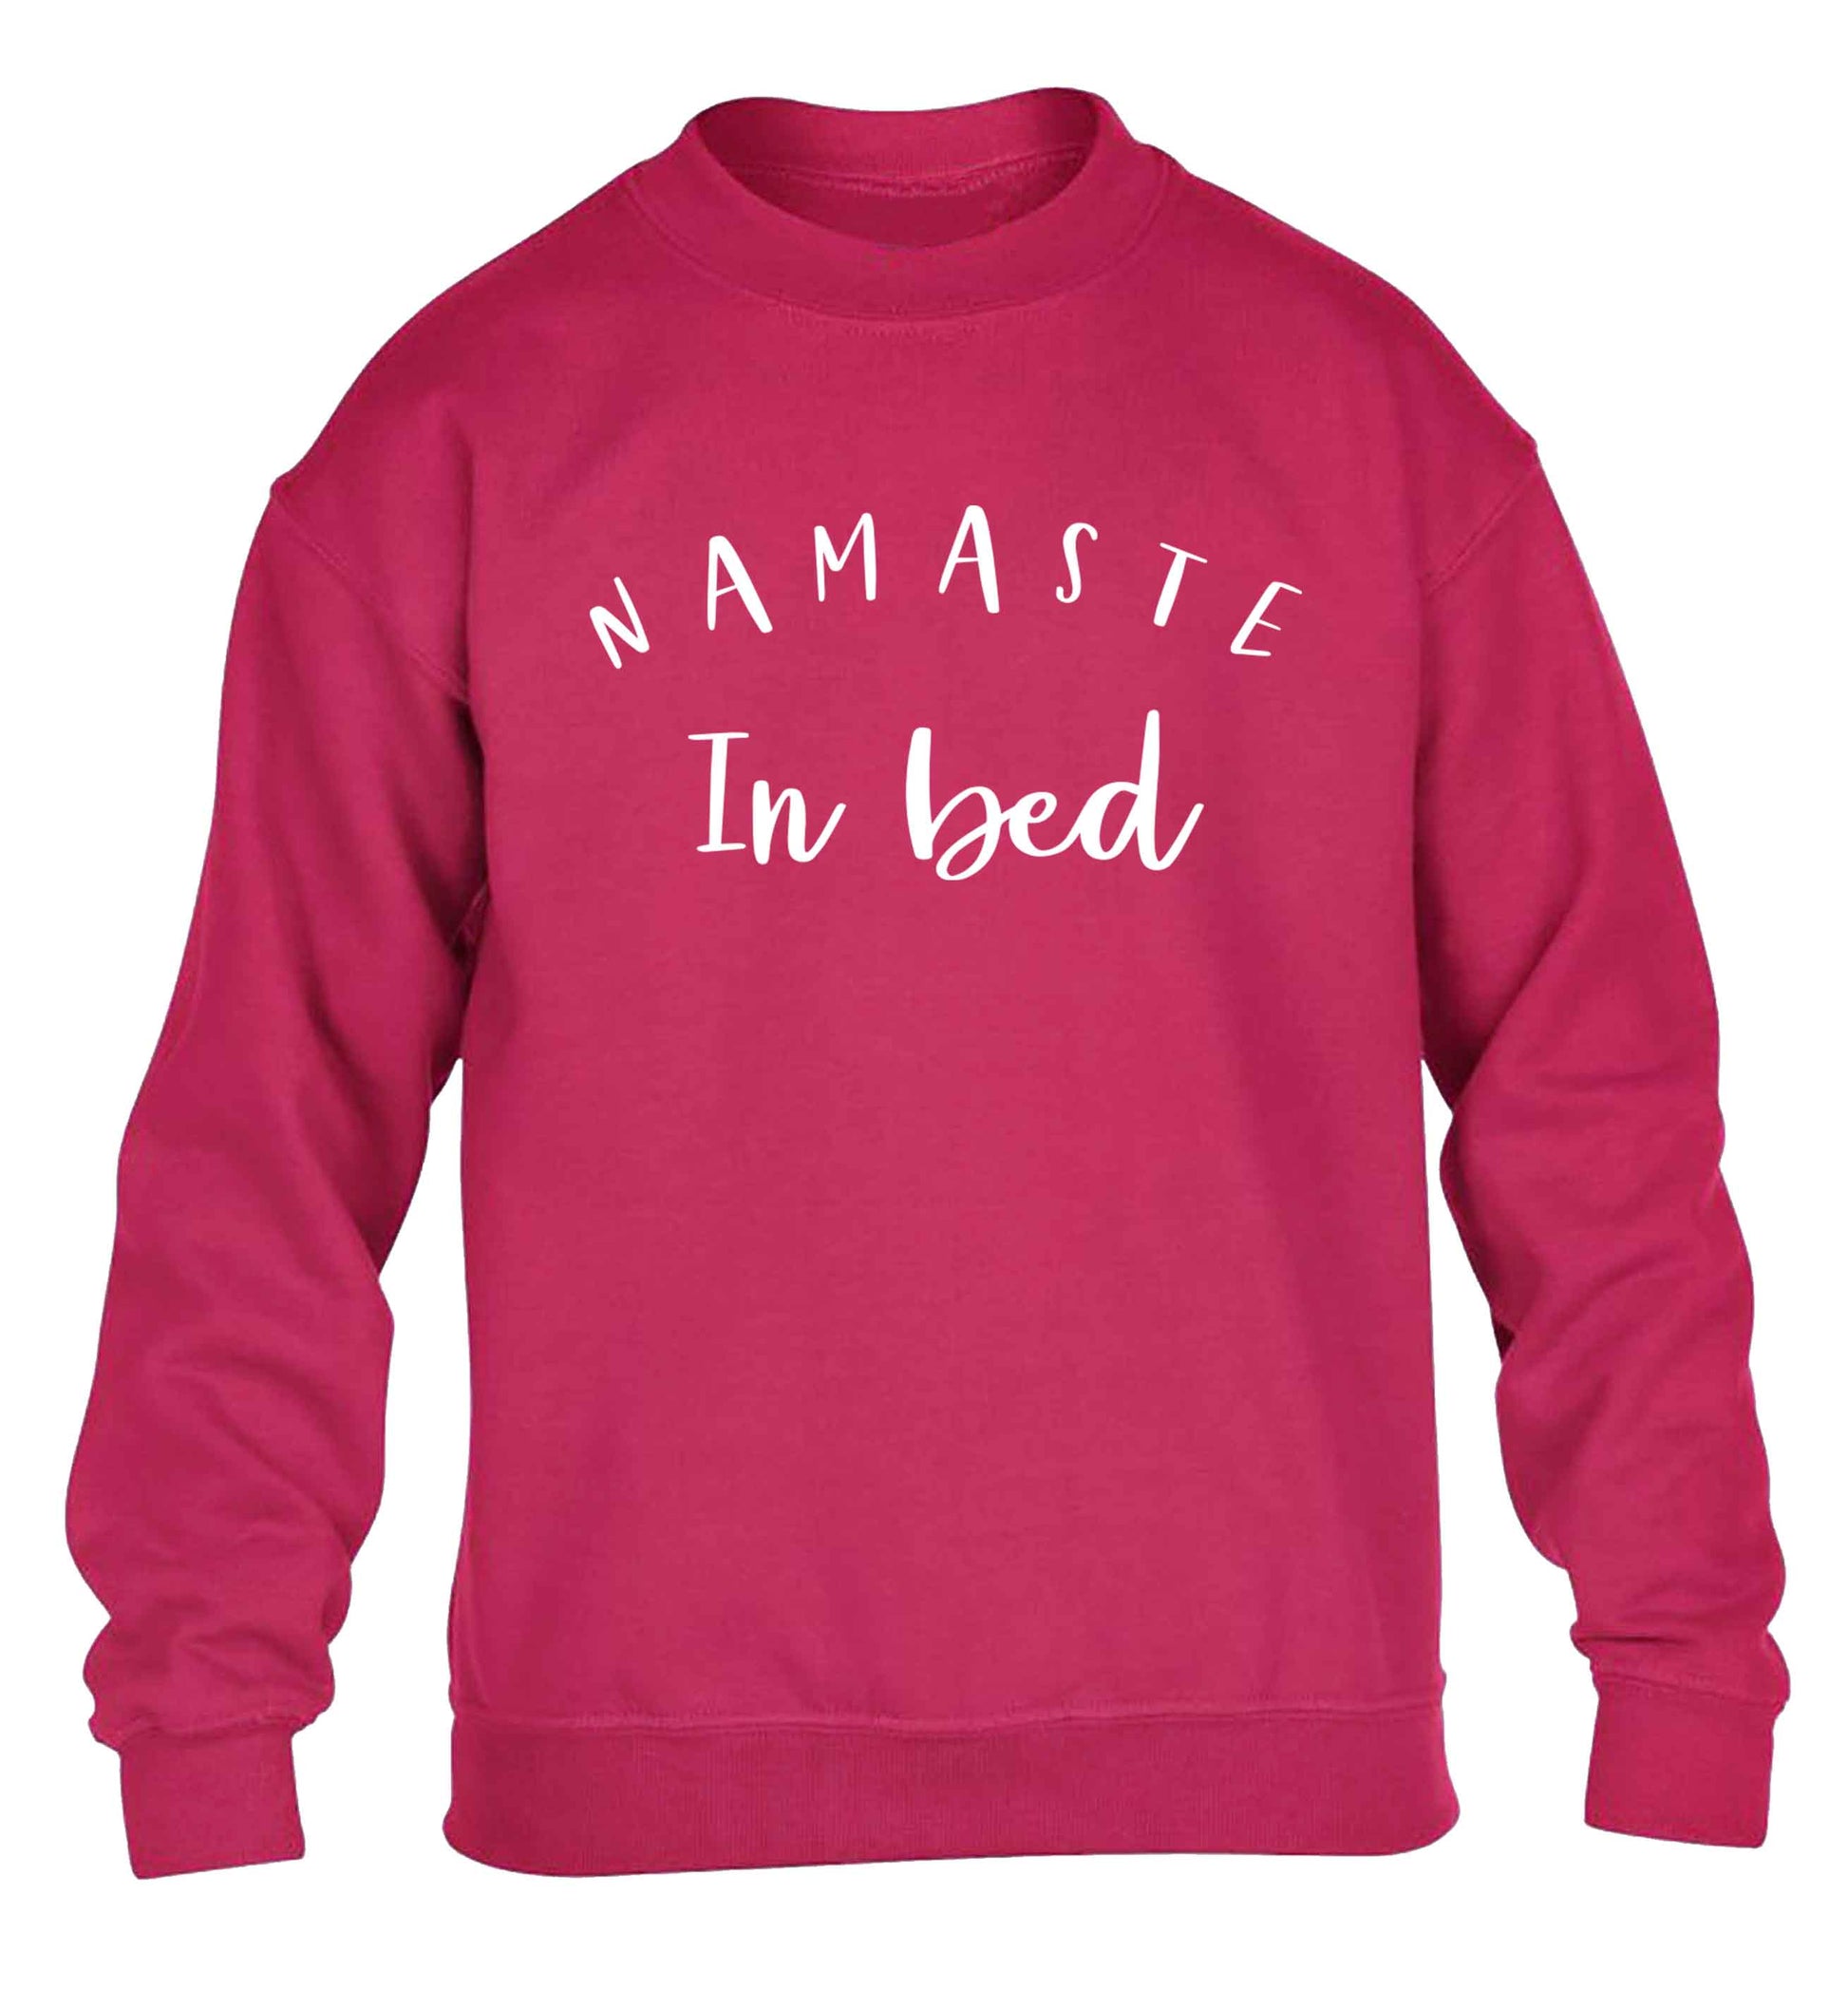 Namaste in bed children's pink sweater 12-13 Years